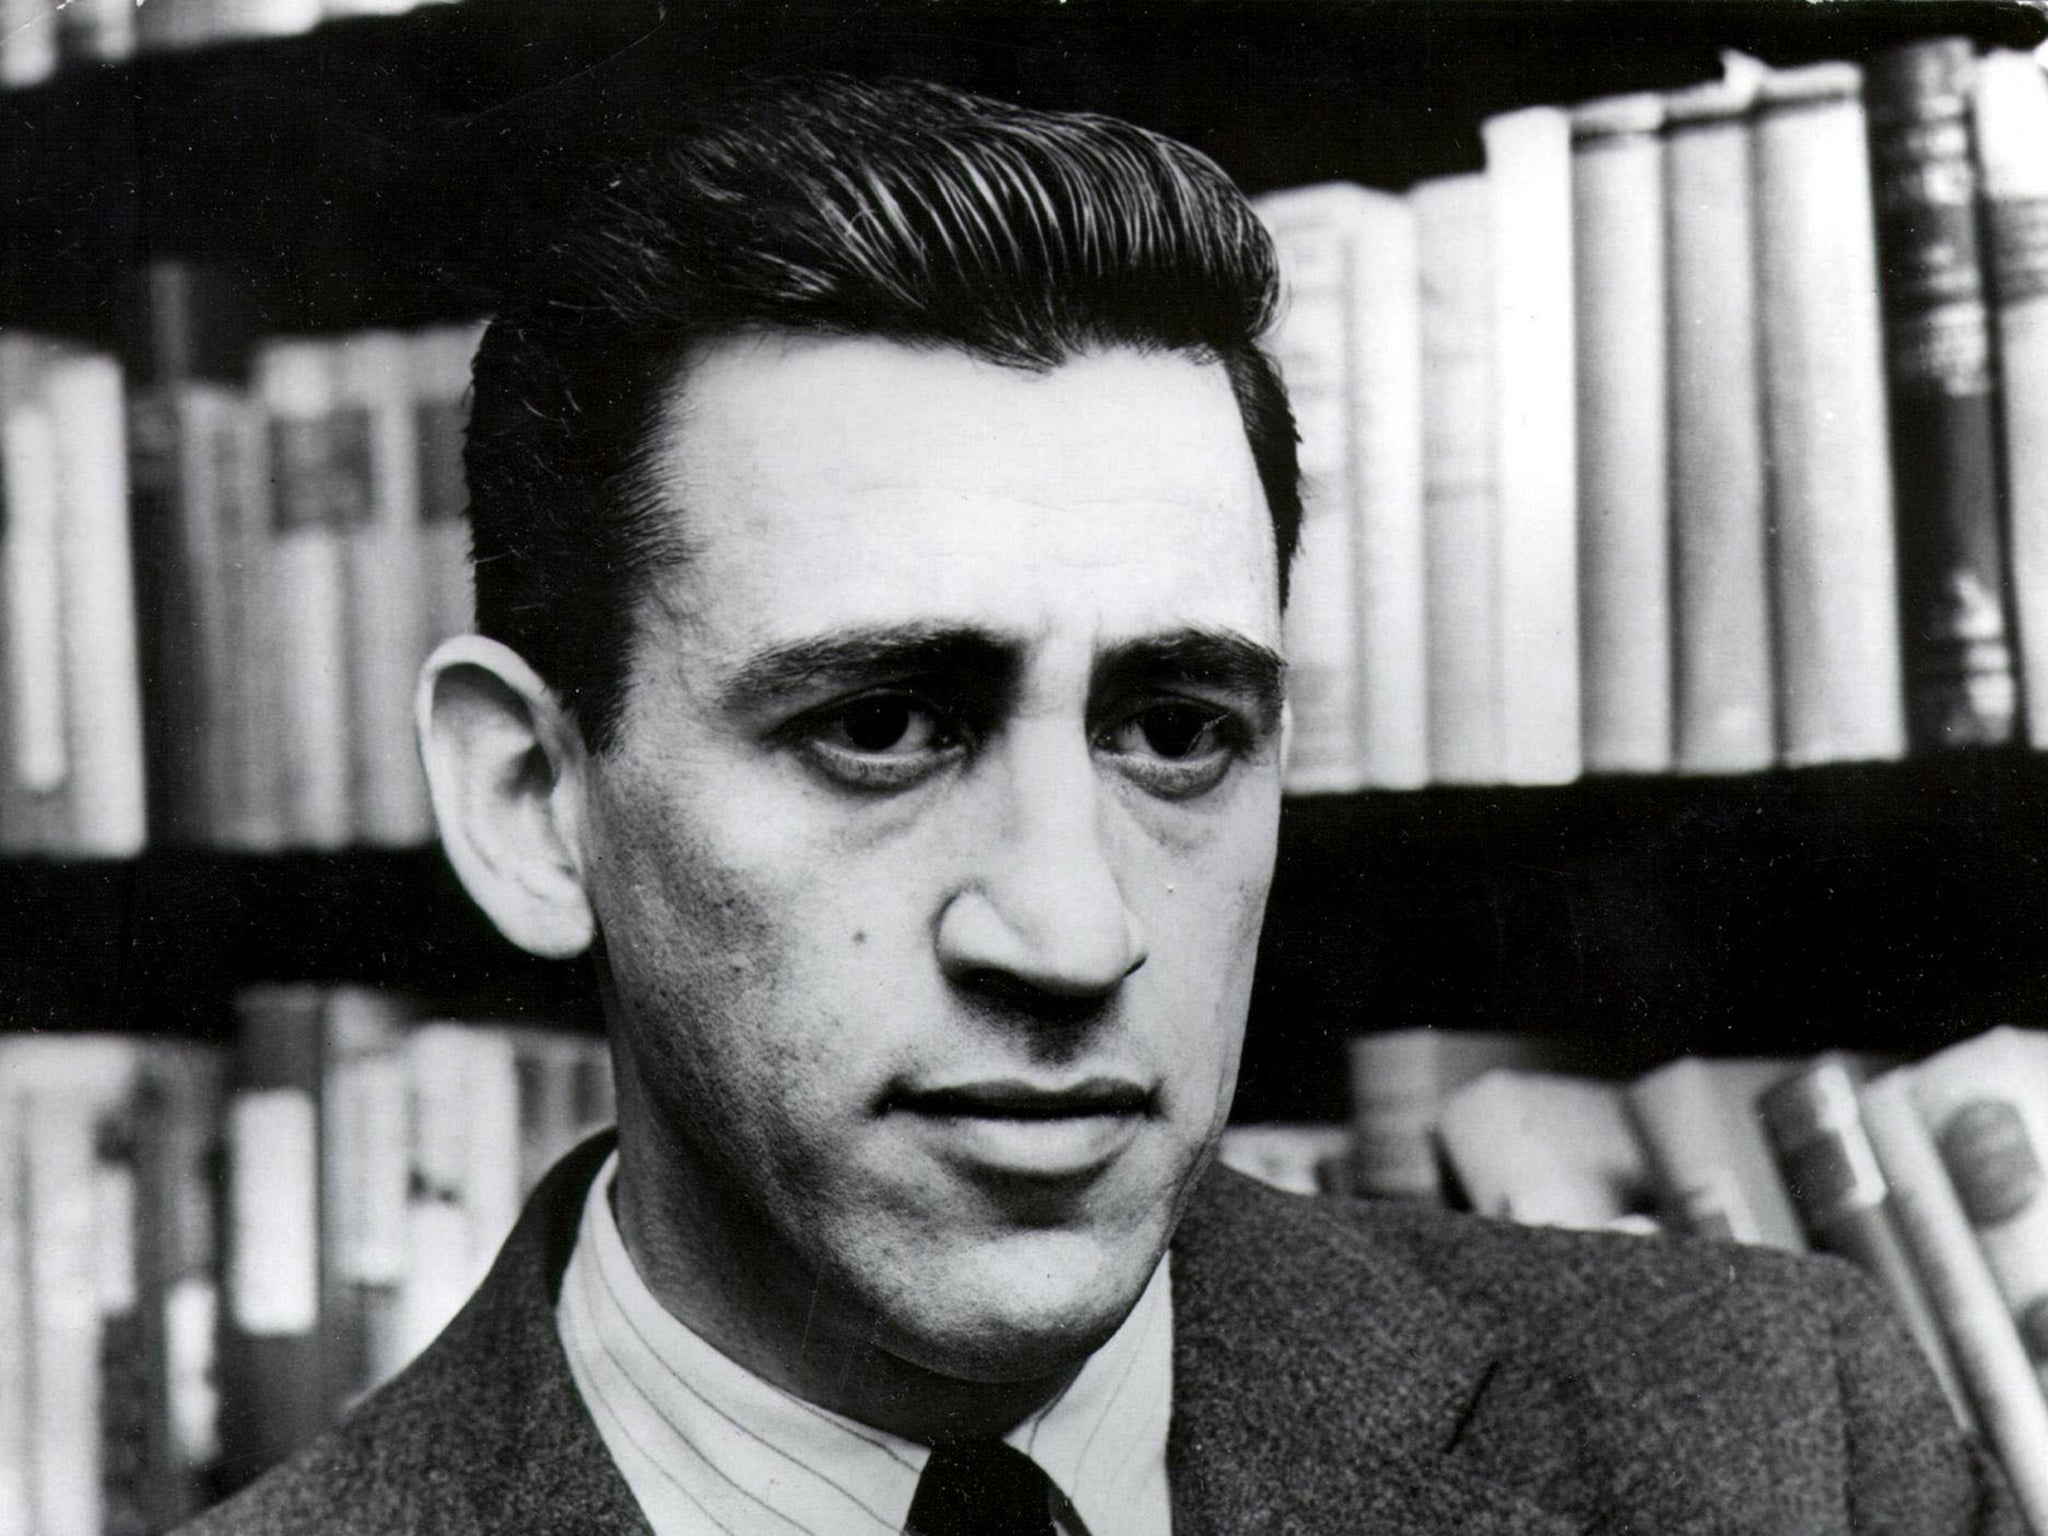 J D Salinger’s only best-selling novel was ‘Catcher in the Rye’ in 1951